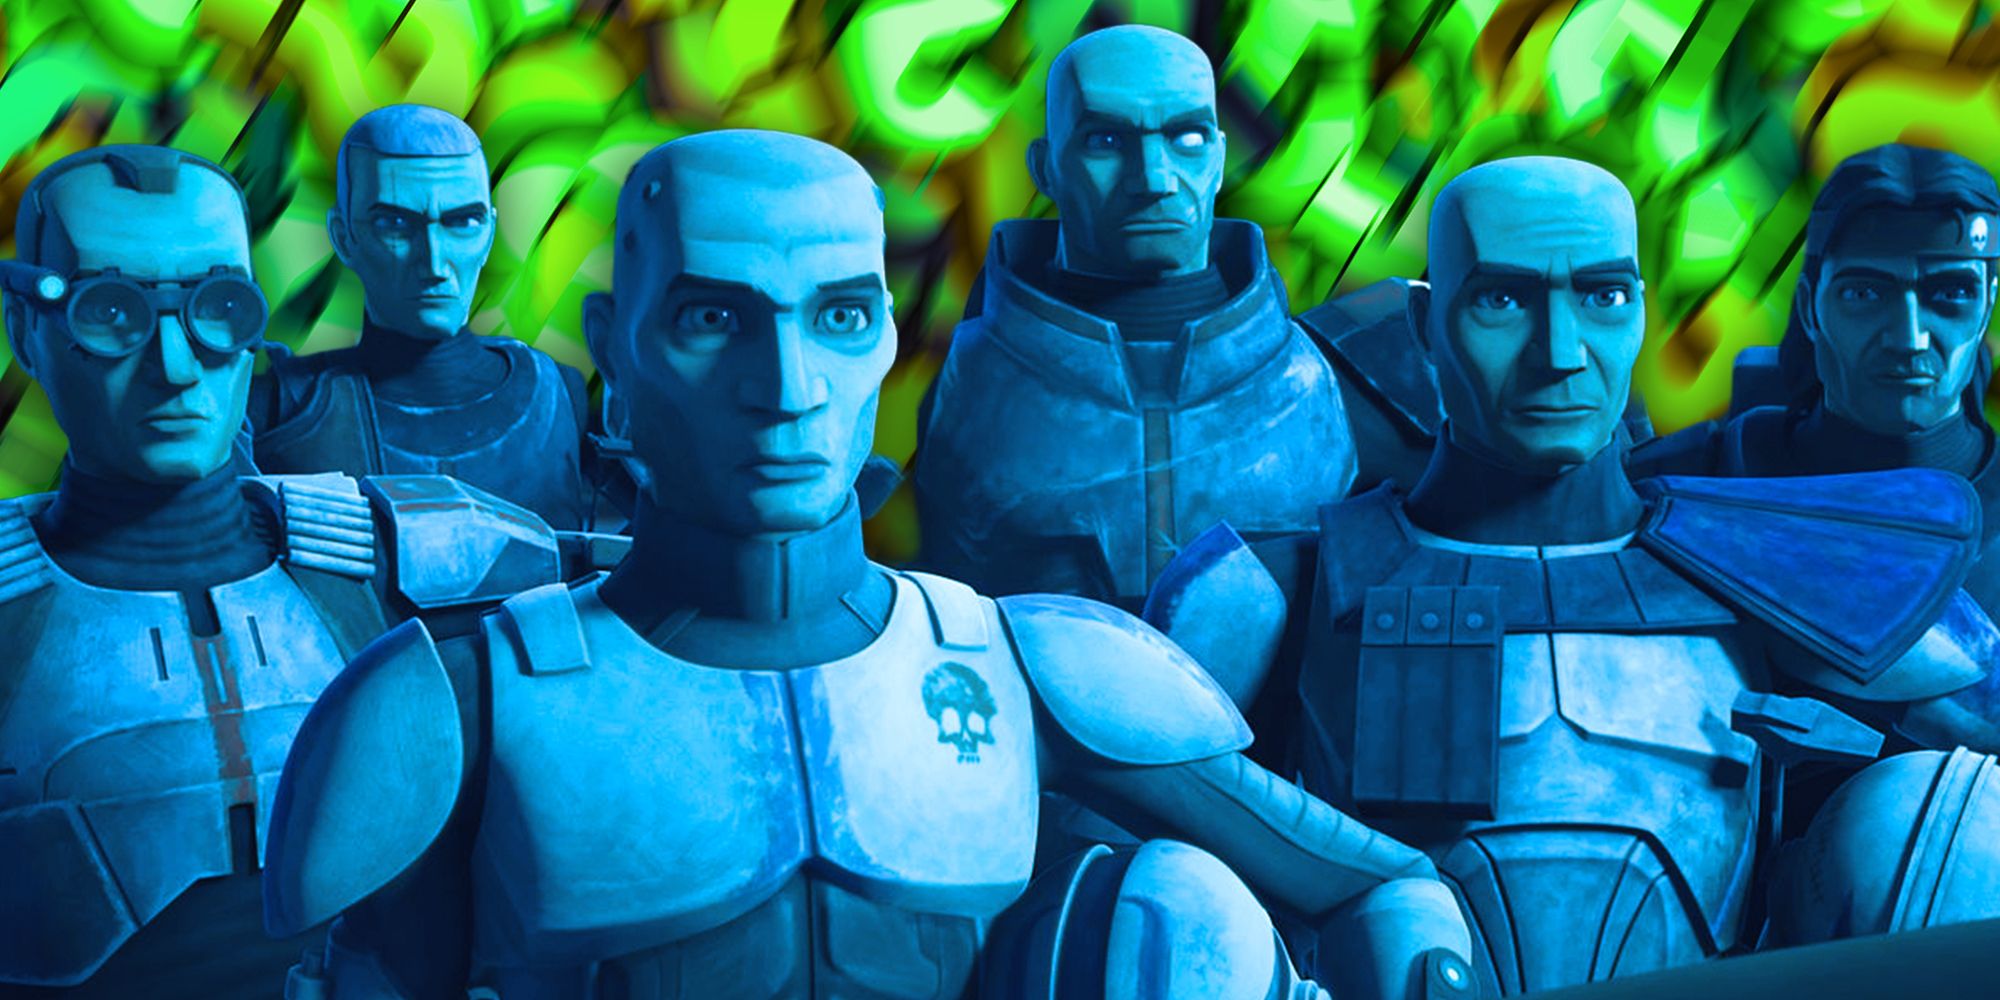 Clone Force 99 stand with Captain Rex in The Clone Wars, facing someone seriously, edited over a question mark background